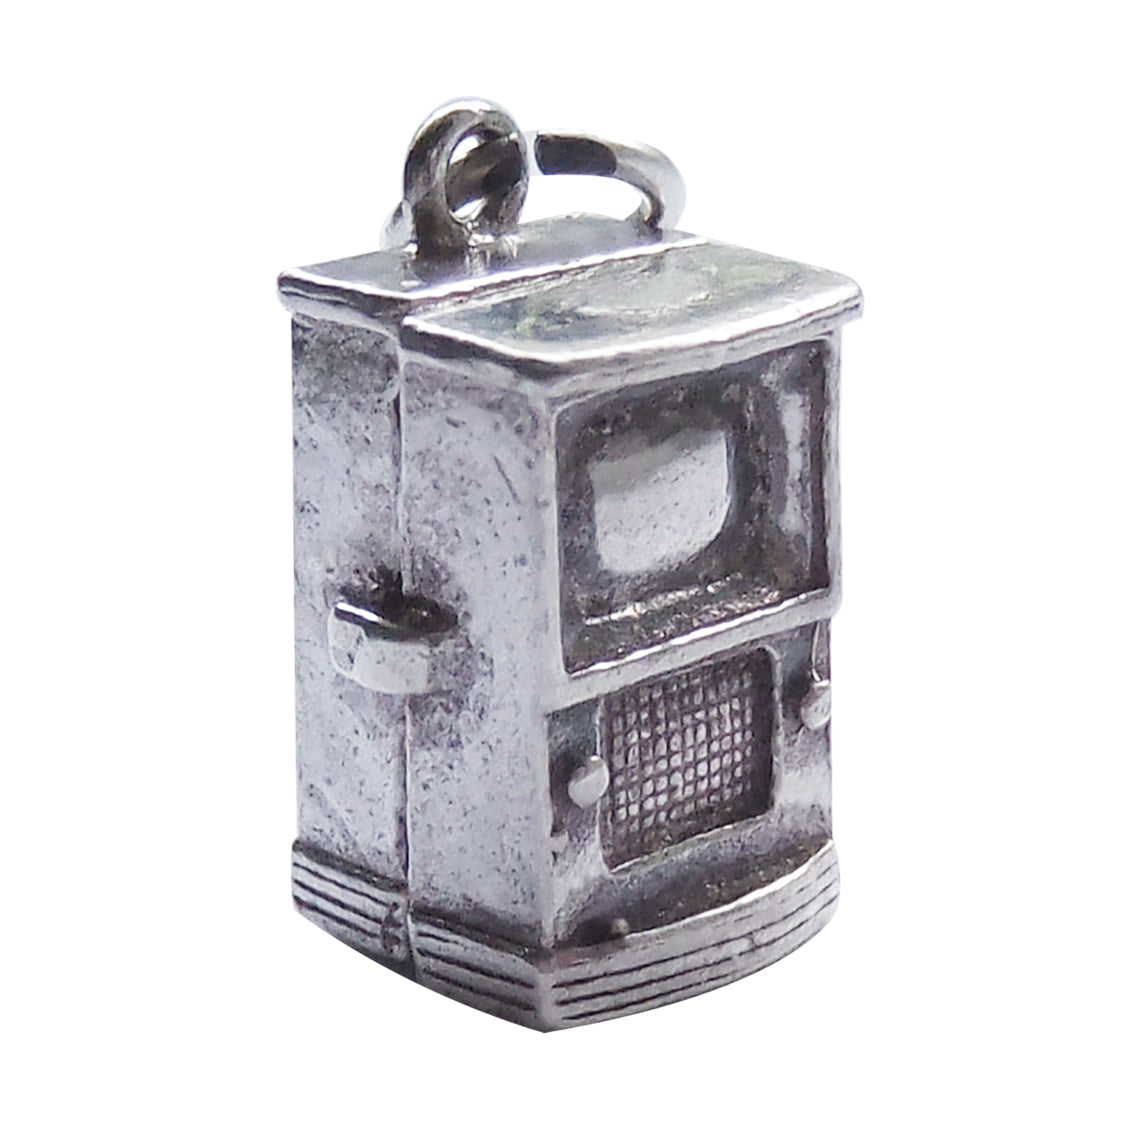 Vintage Silver Television Charm Opens to Camera